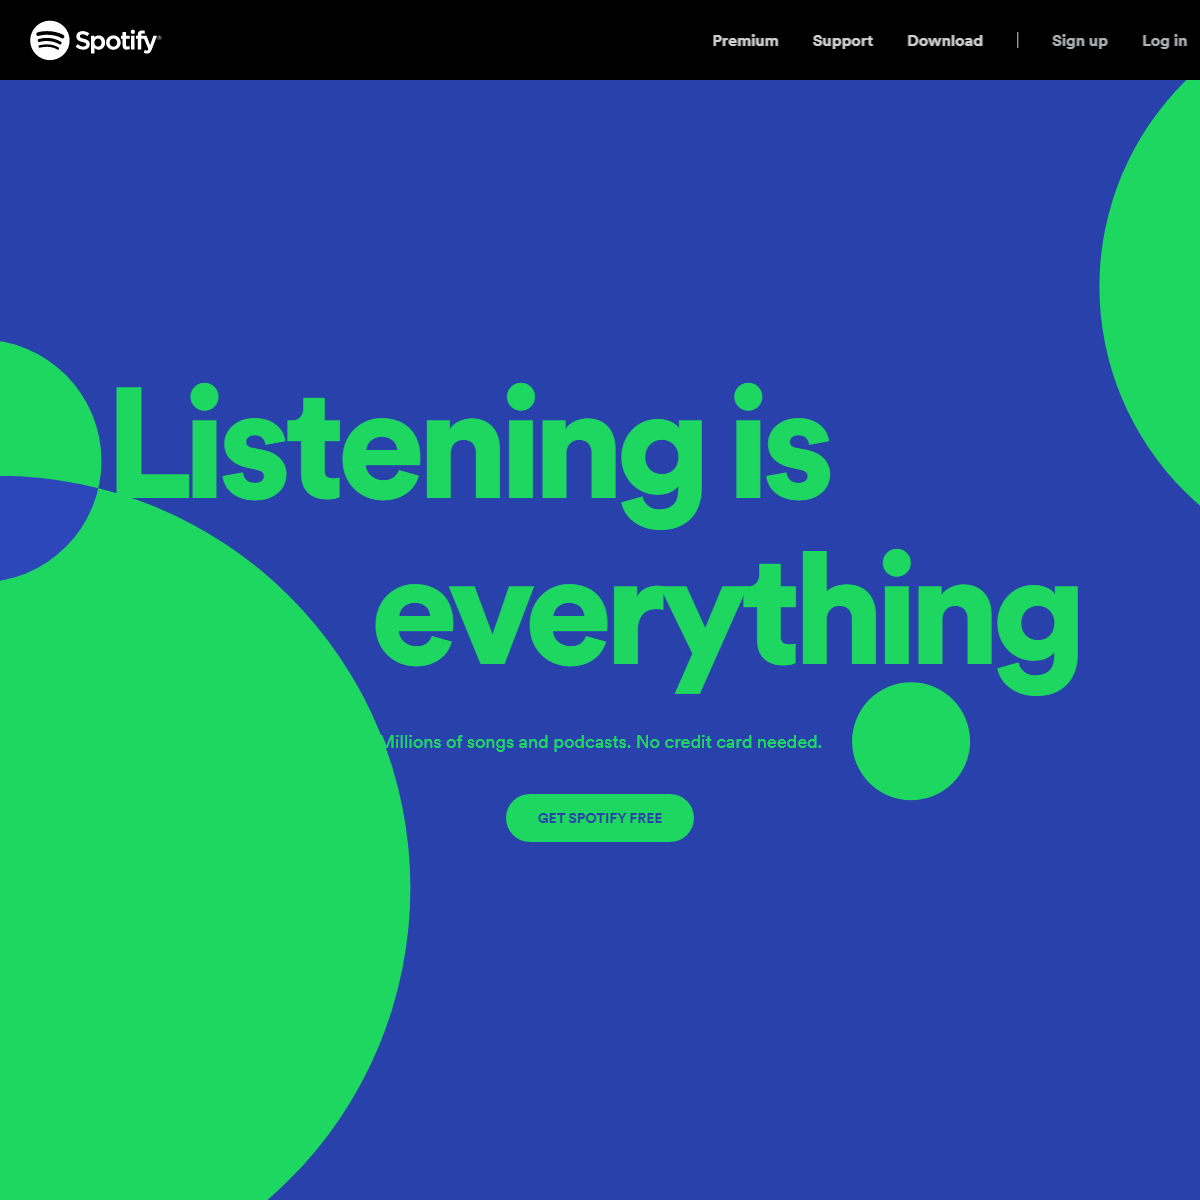 A complete backup of https://www.spotify.com/us/